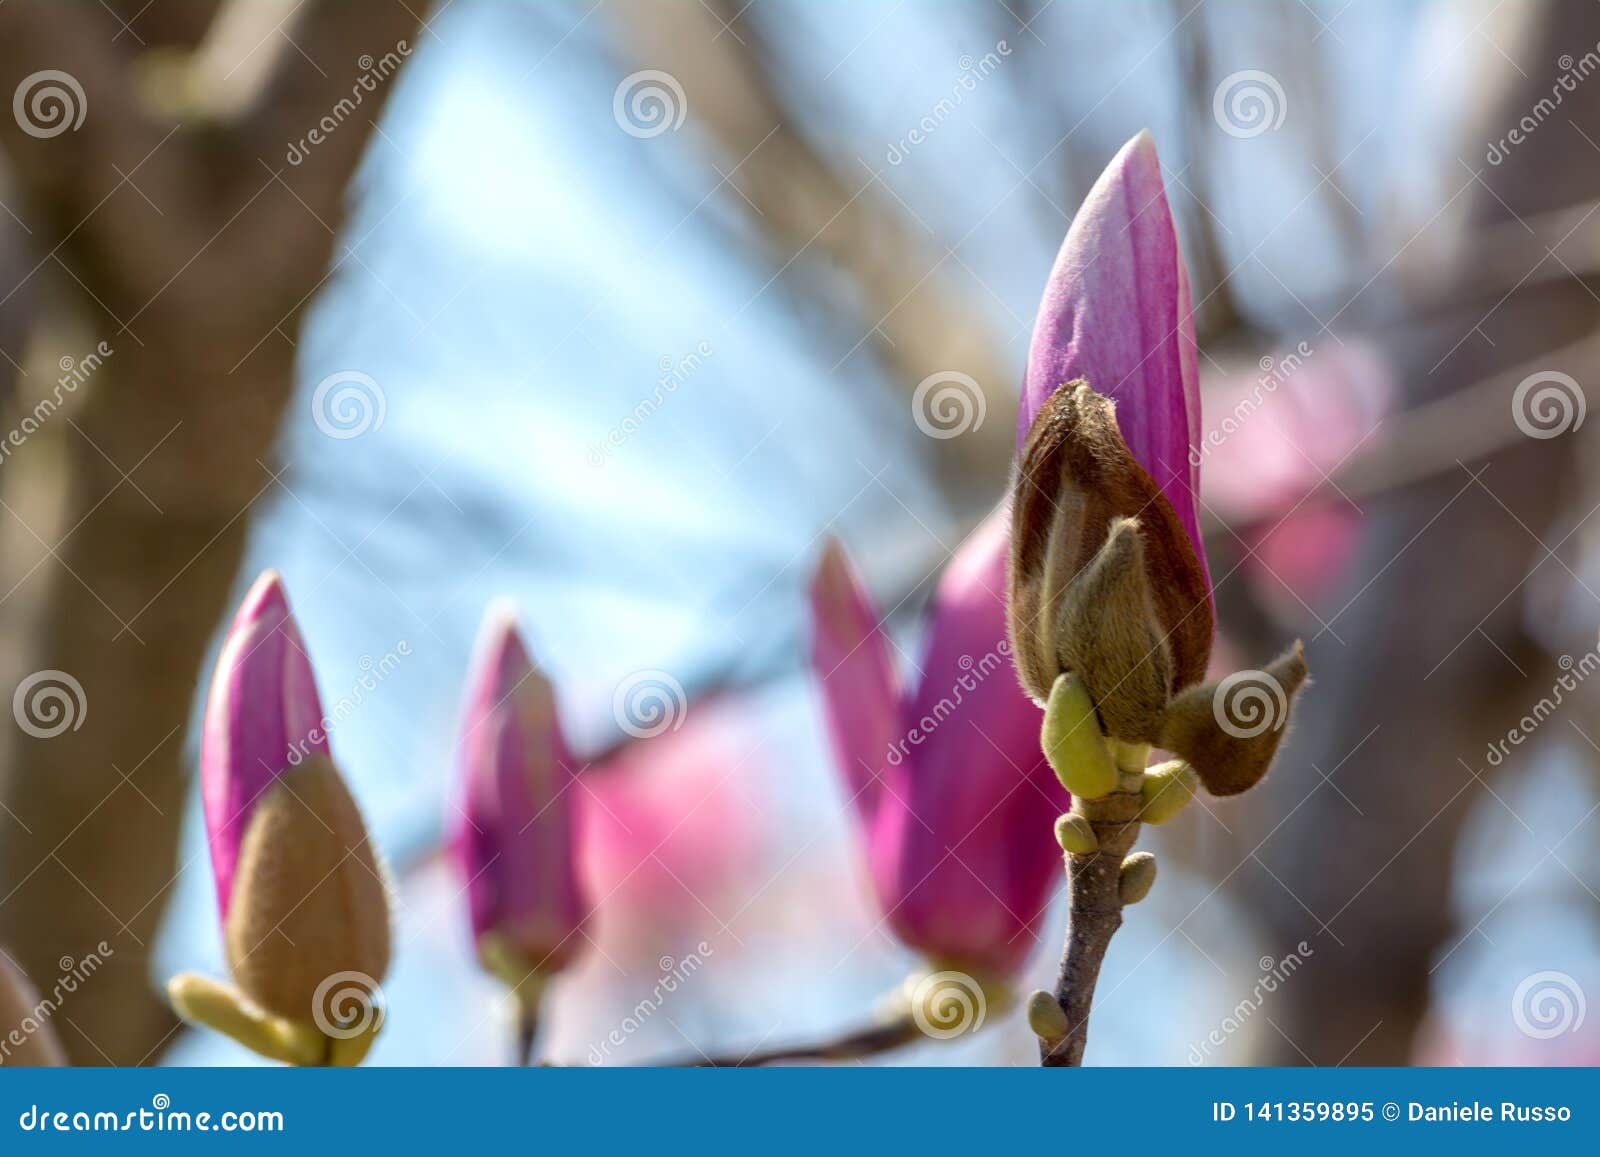 branch of magnolia flowers